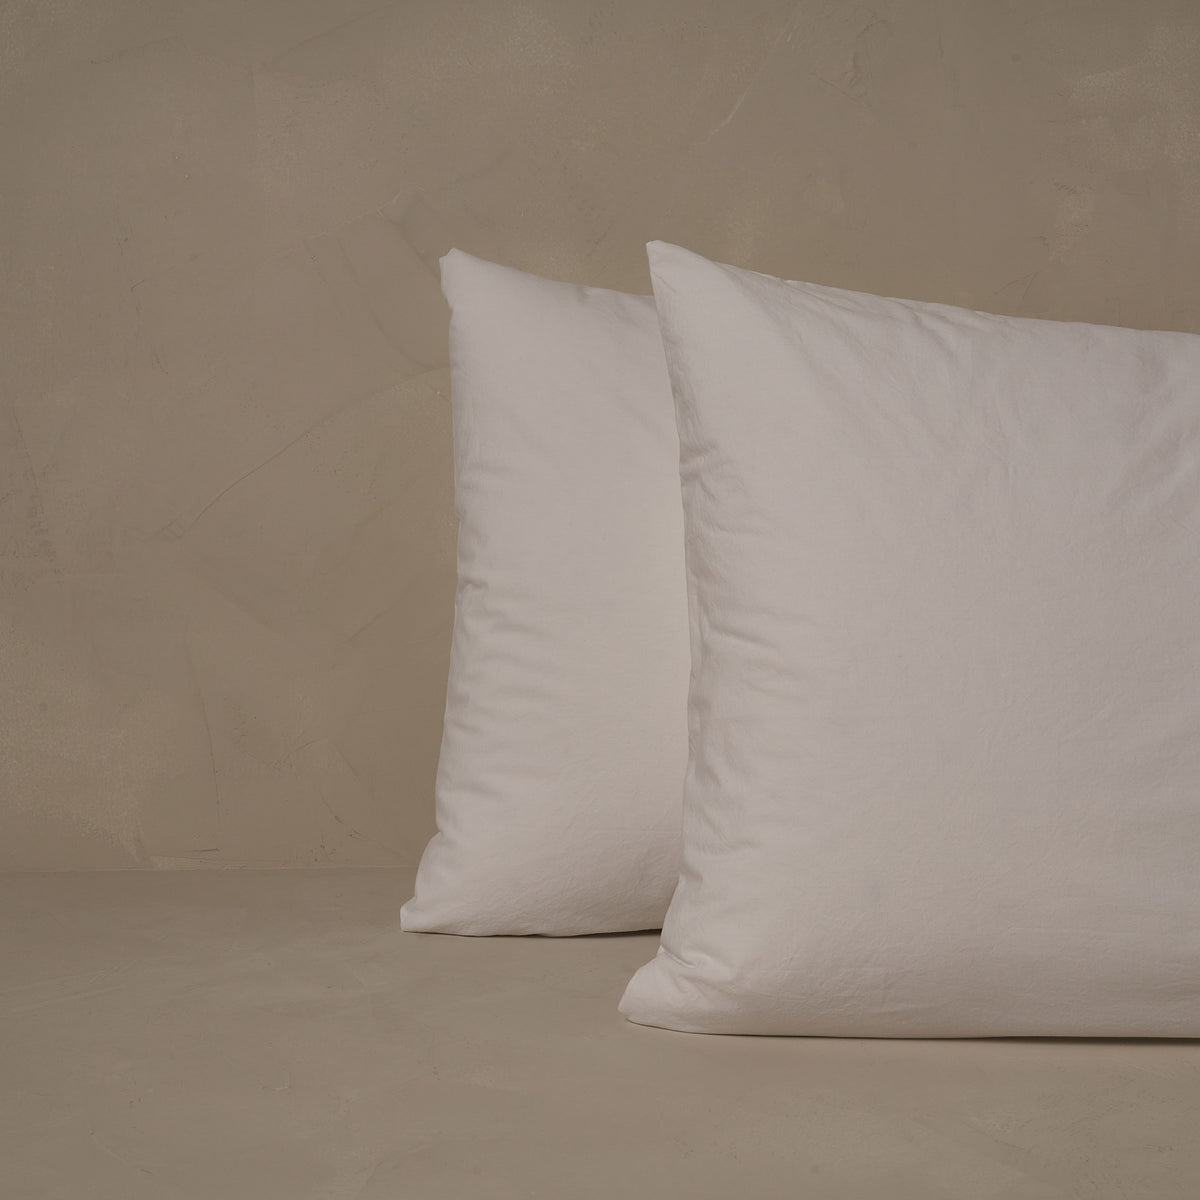 An image of two pillows stacked one in front of the other. The pillow cases are made of LETTO 100% Organic Cotton Percale in color white. data-image-id=